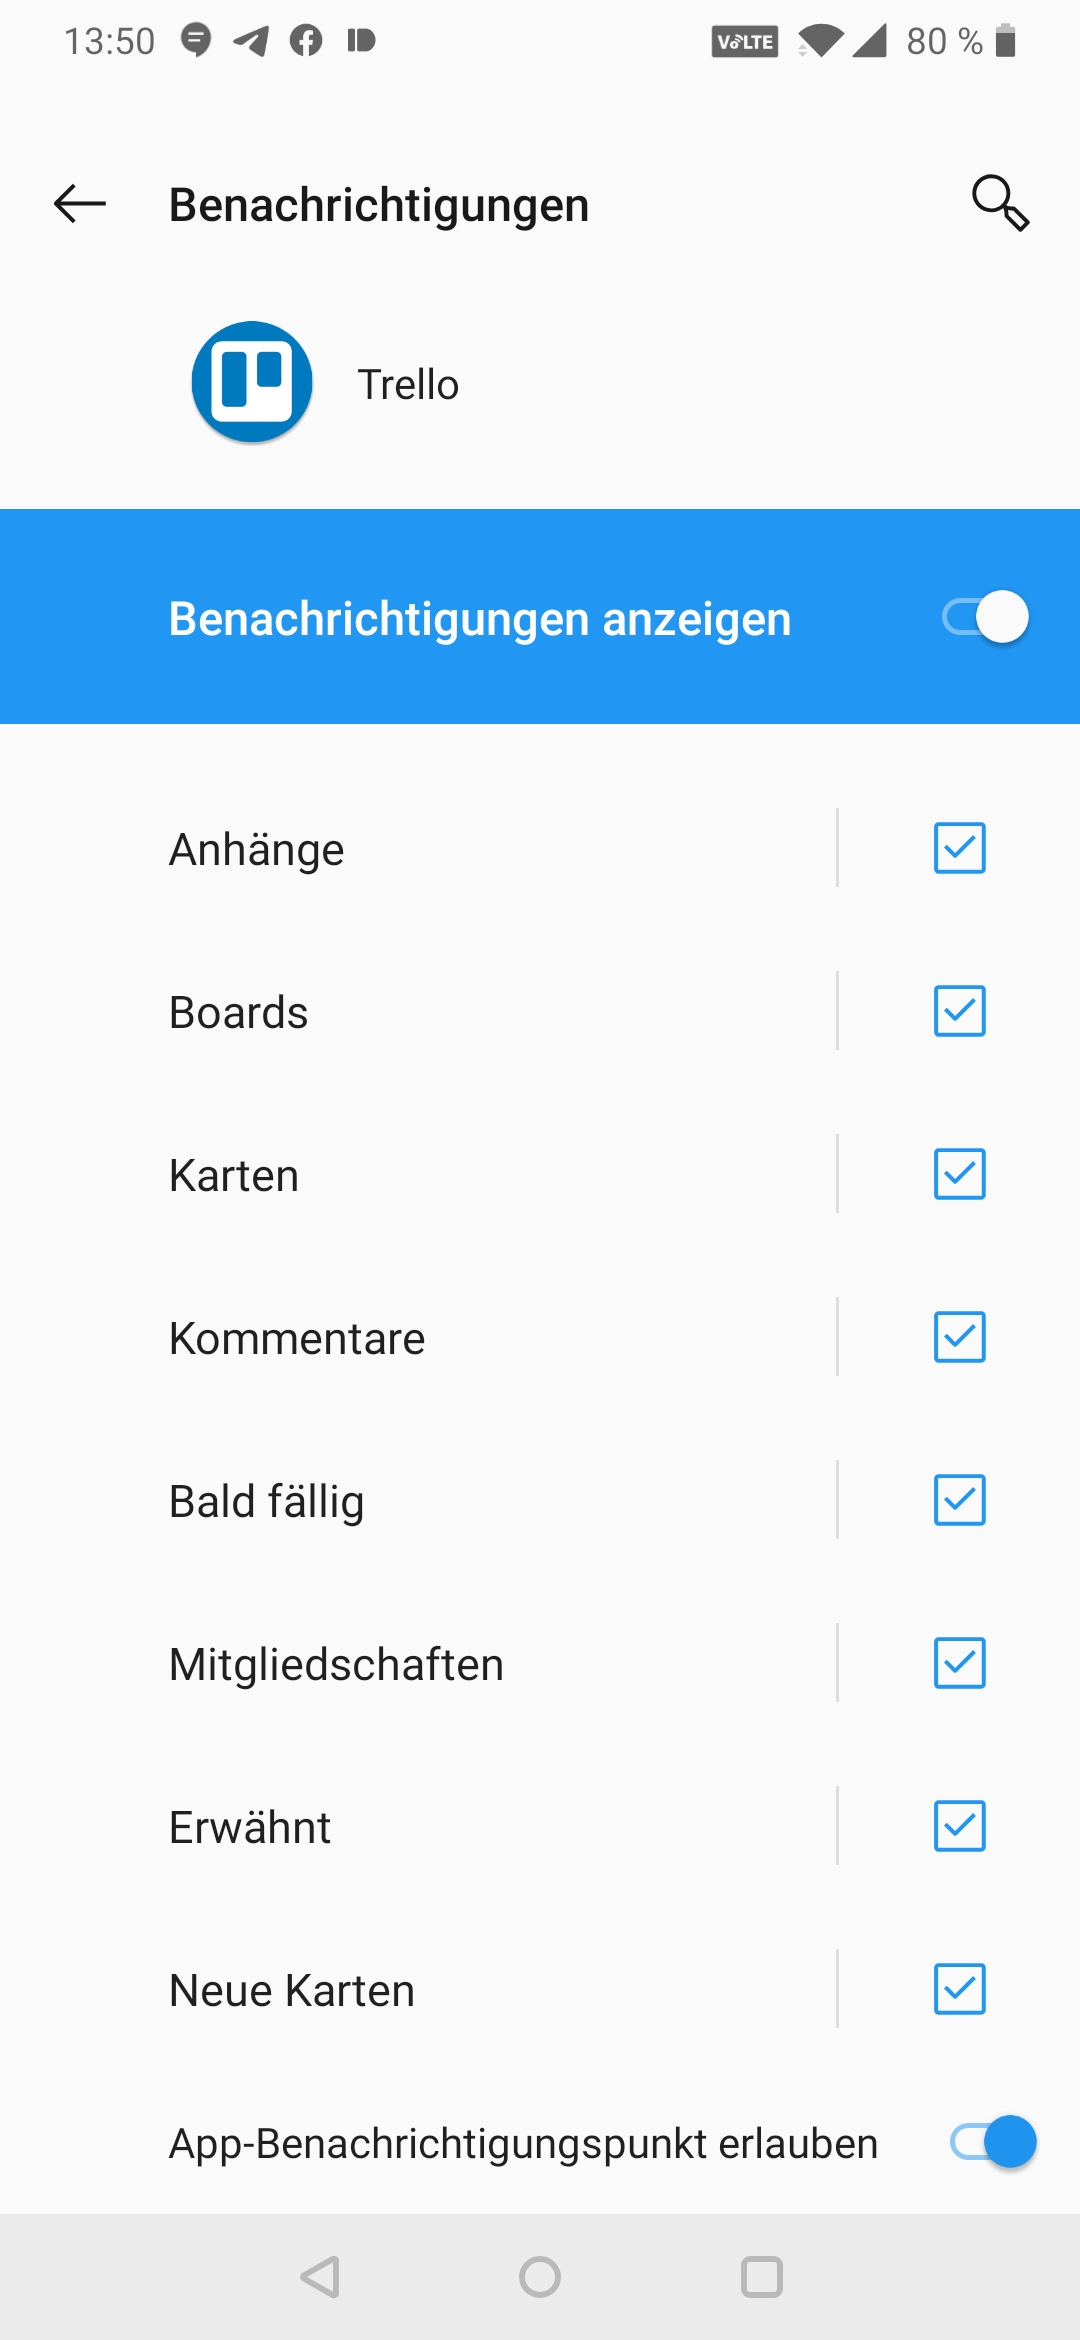 How to Trello Not Working Issue on Android?